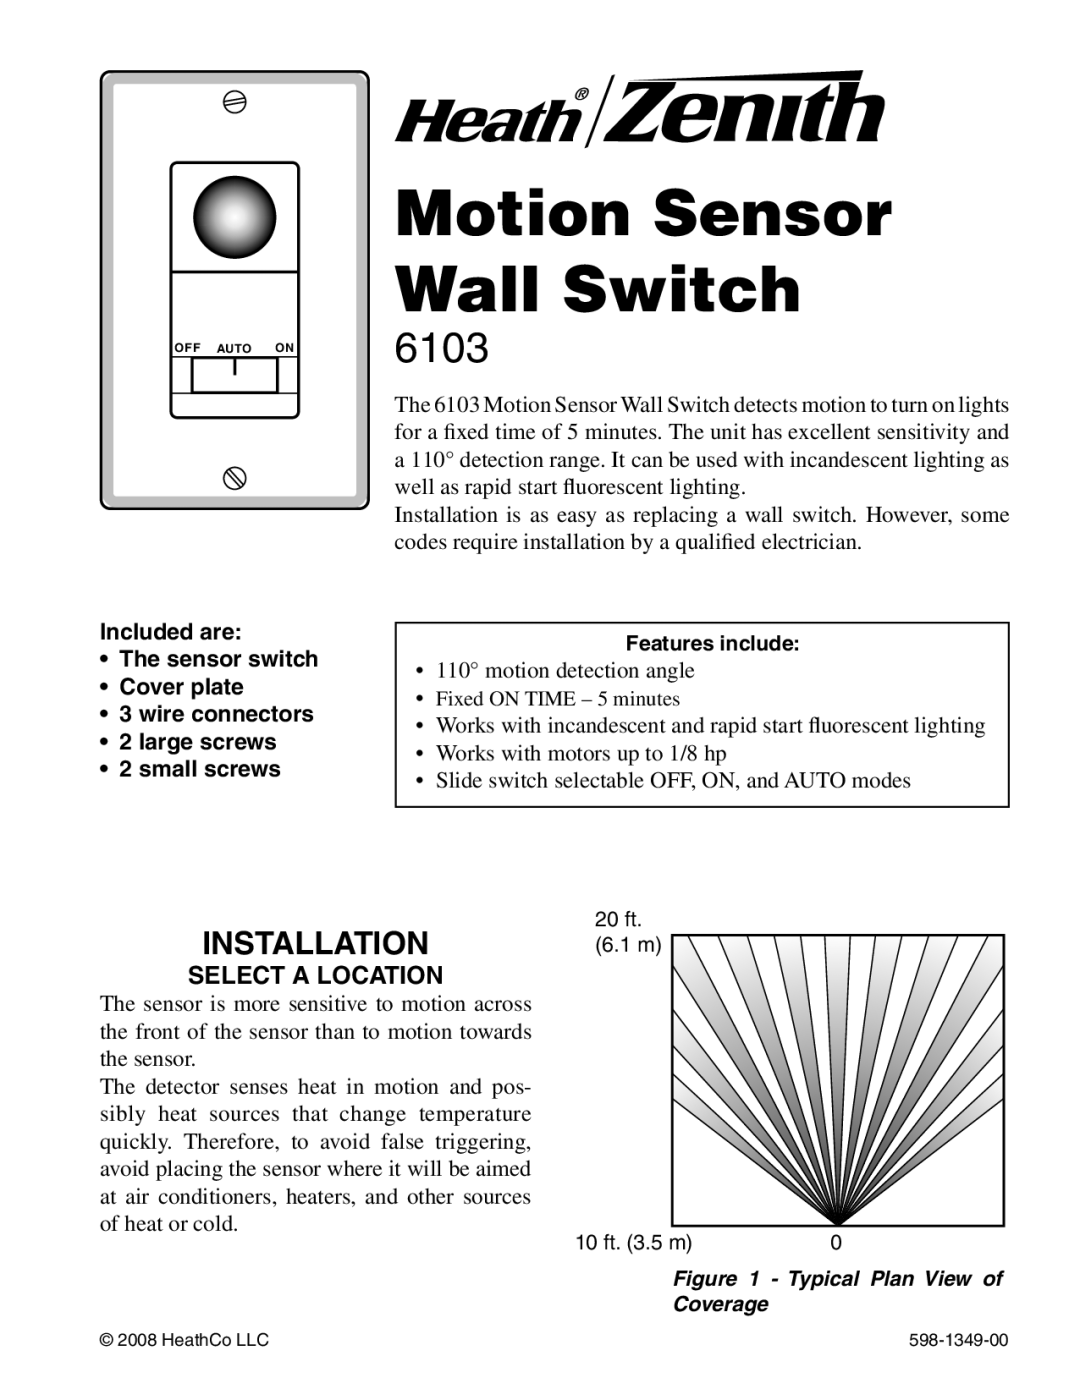 Heath Zenith 6103 manual Motion Sensor Wall Switch, Installation, Included are The sensor switch Cover plate, small screws 